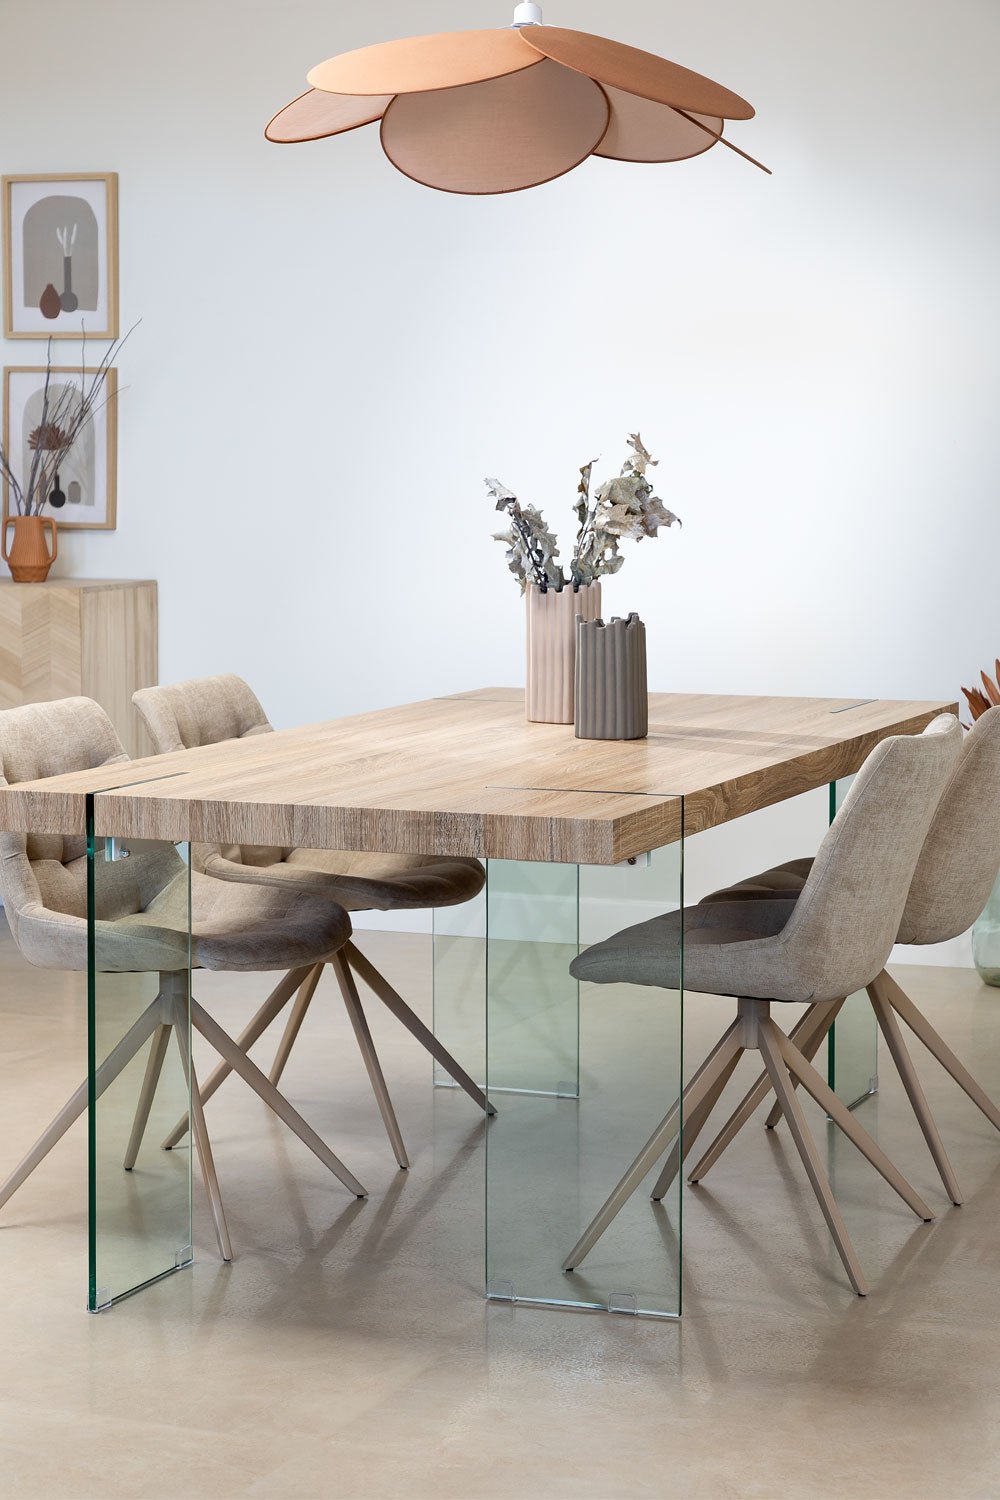 MDF Rectangular Dining Table with Glass legs Kali, gallery image 1